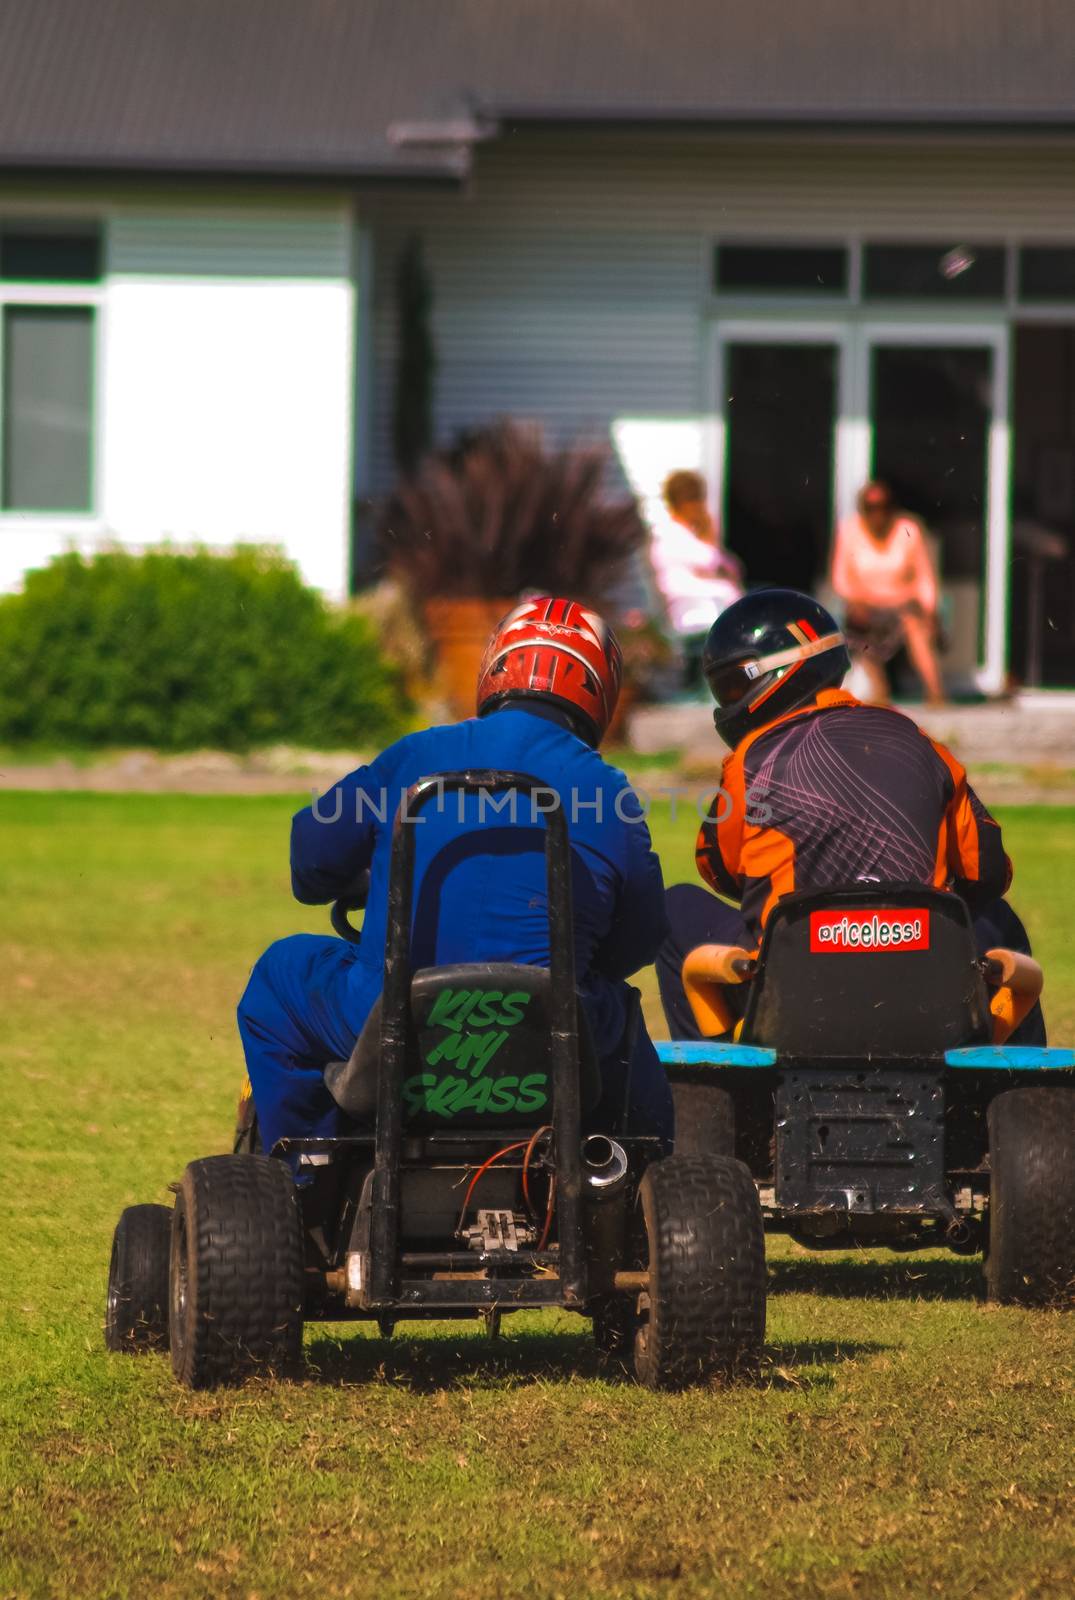 A couple of drivers participating in a lawnmower race